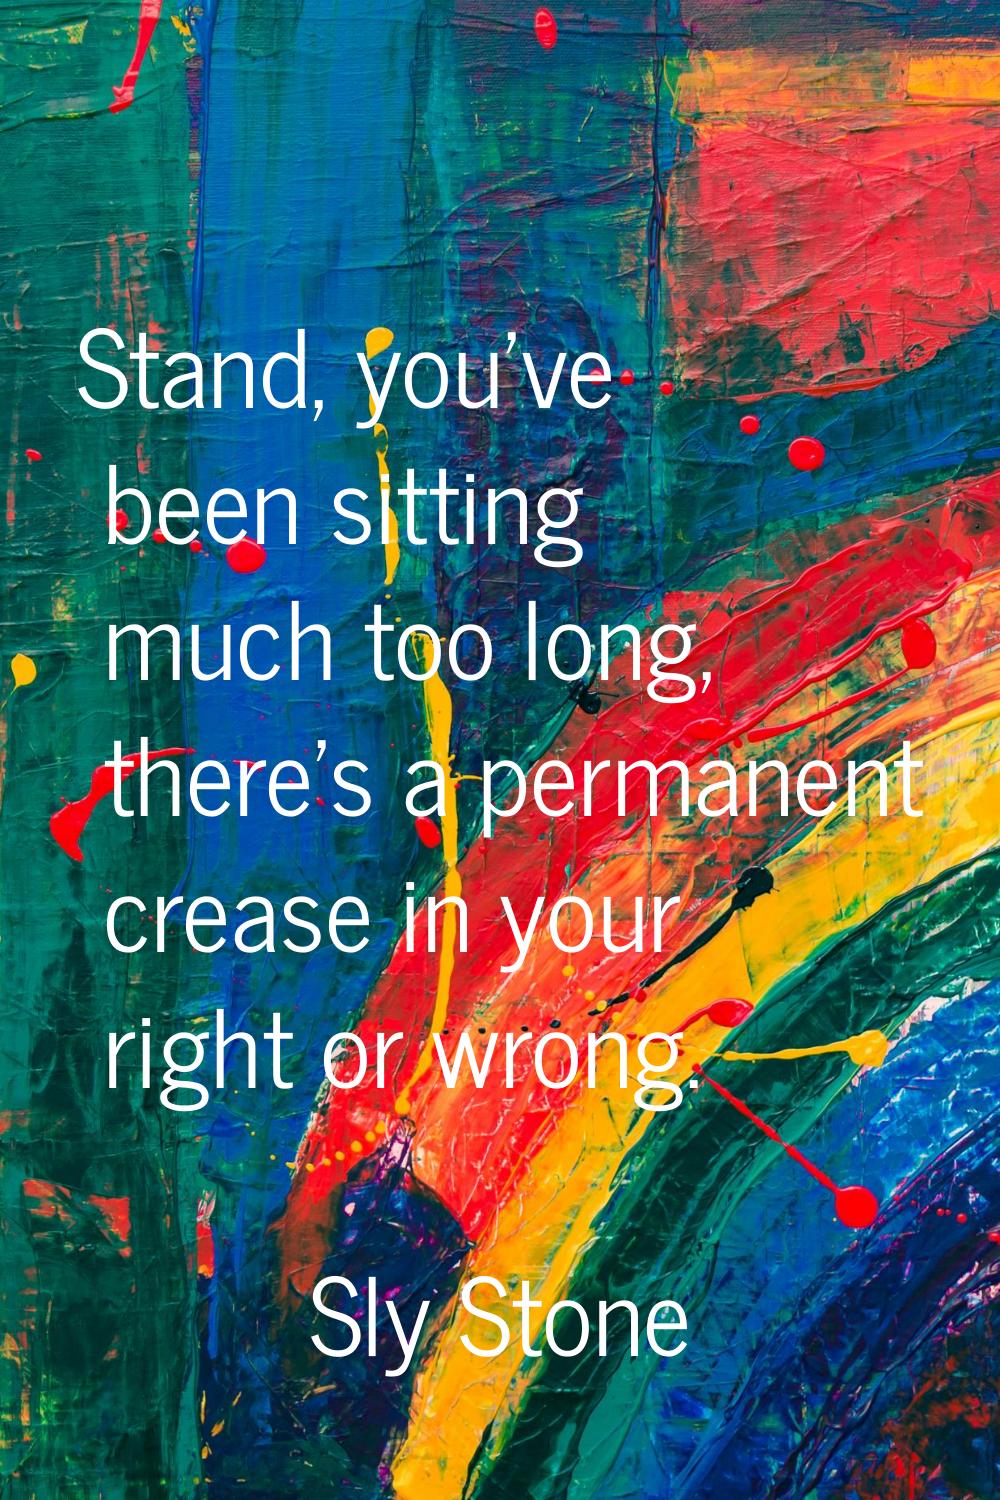 Stand, you've been sitting much too long, there's a permanent crease in your right or wrong.